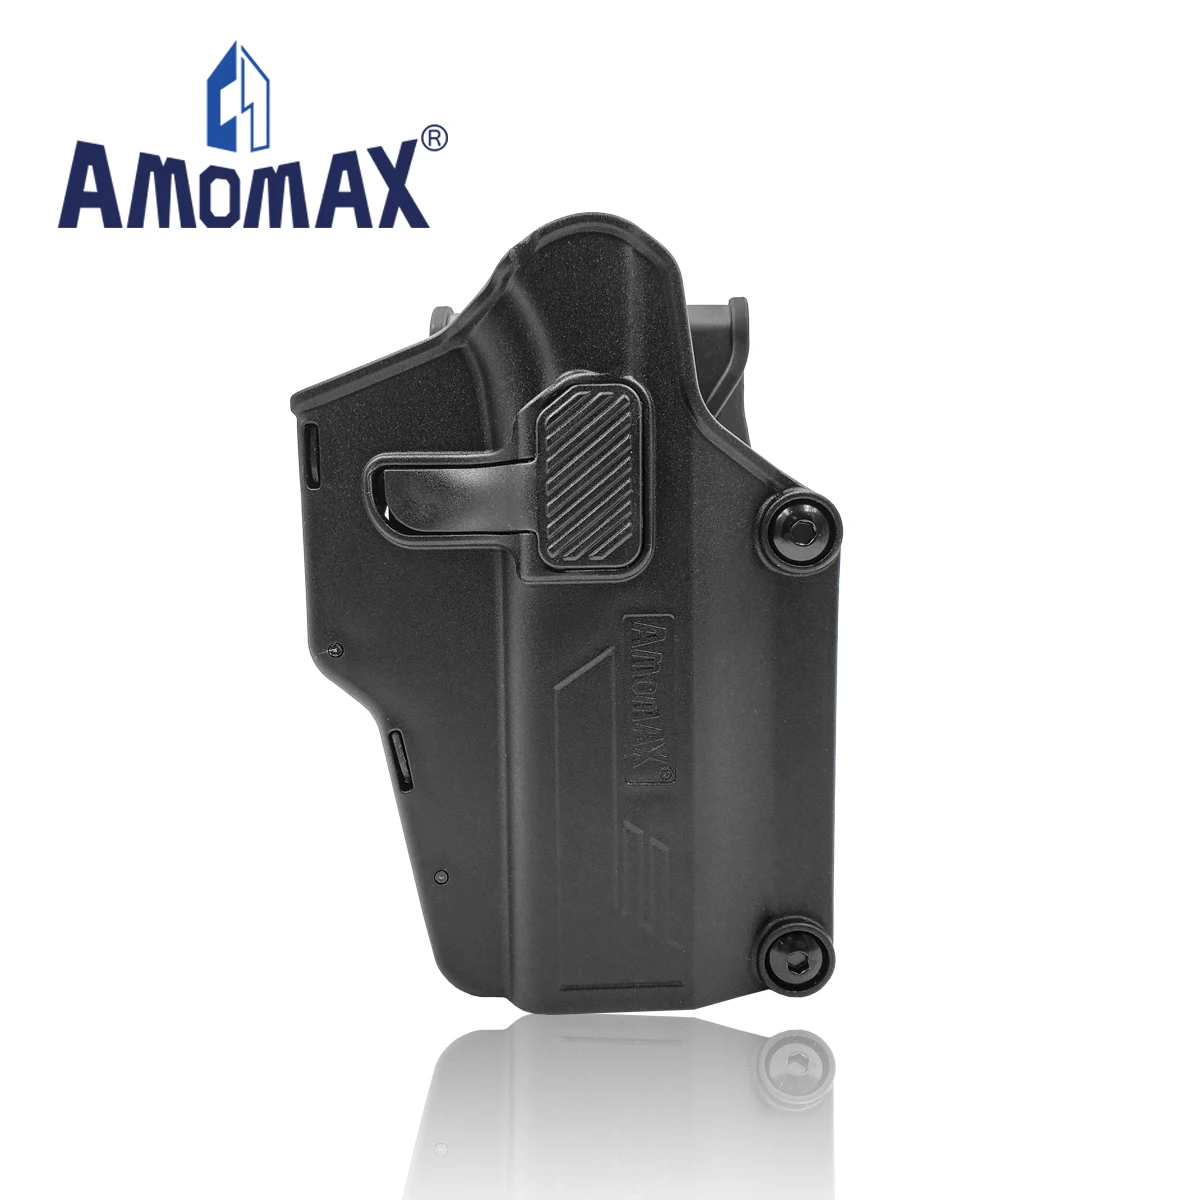 

Amomax Tactical Plastic General Multi-fit Per-fit Universal Tactical Hand Gun Belly Band Holsters for 200 more guns, Black /fde / od green